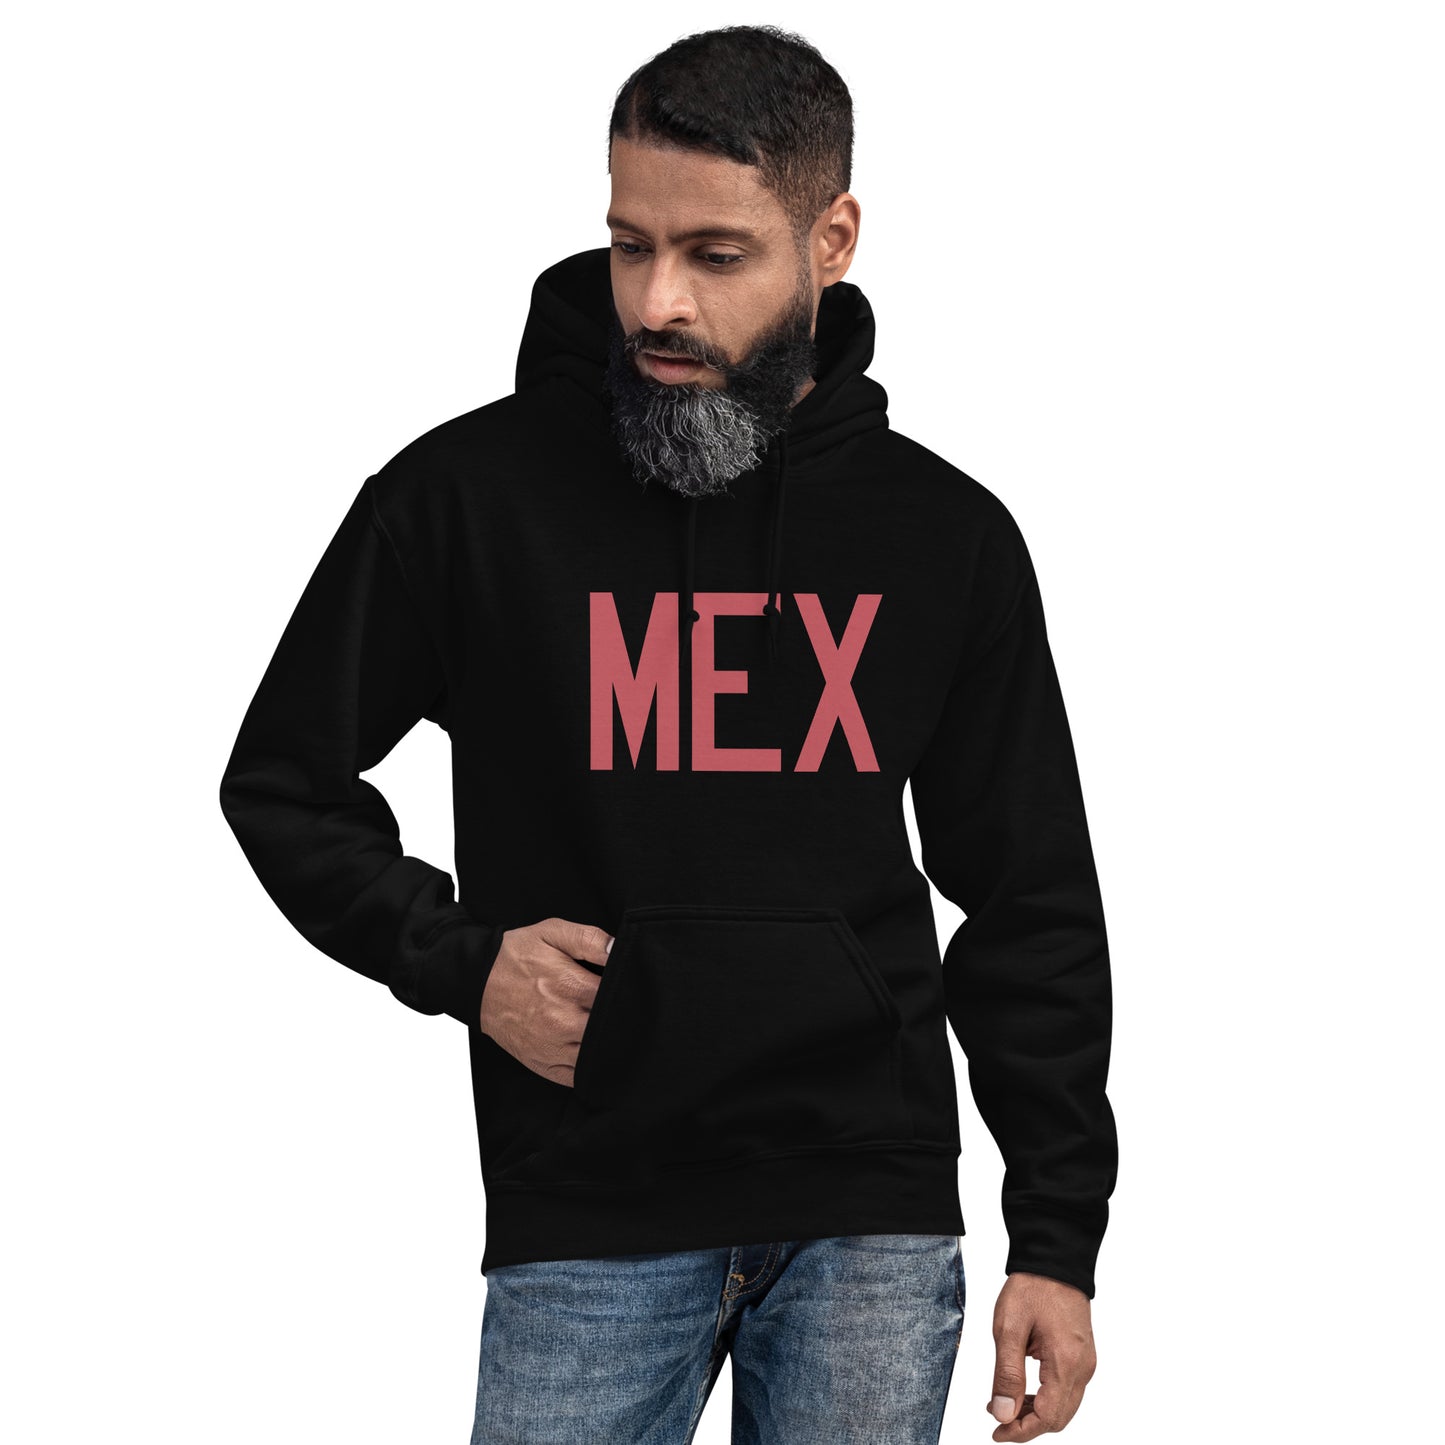 Aviation Enthusiast Hoodie - Deep Pink Graphic • MEX Mexico City • YHM Designs - Image 05